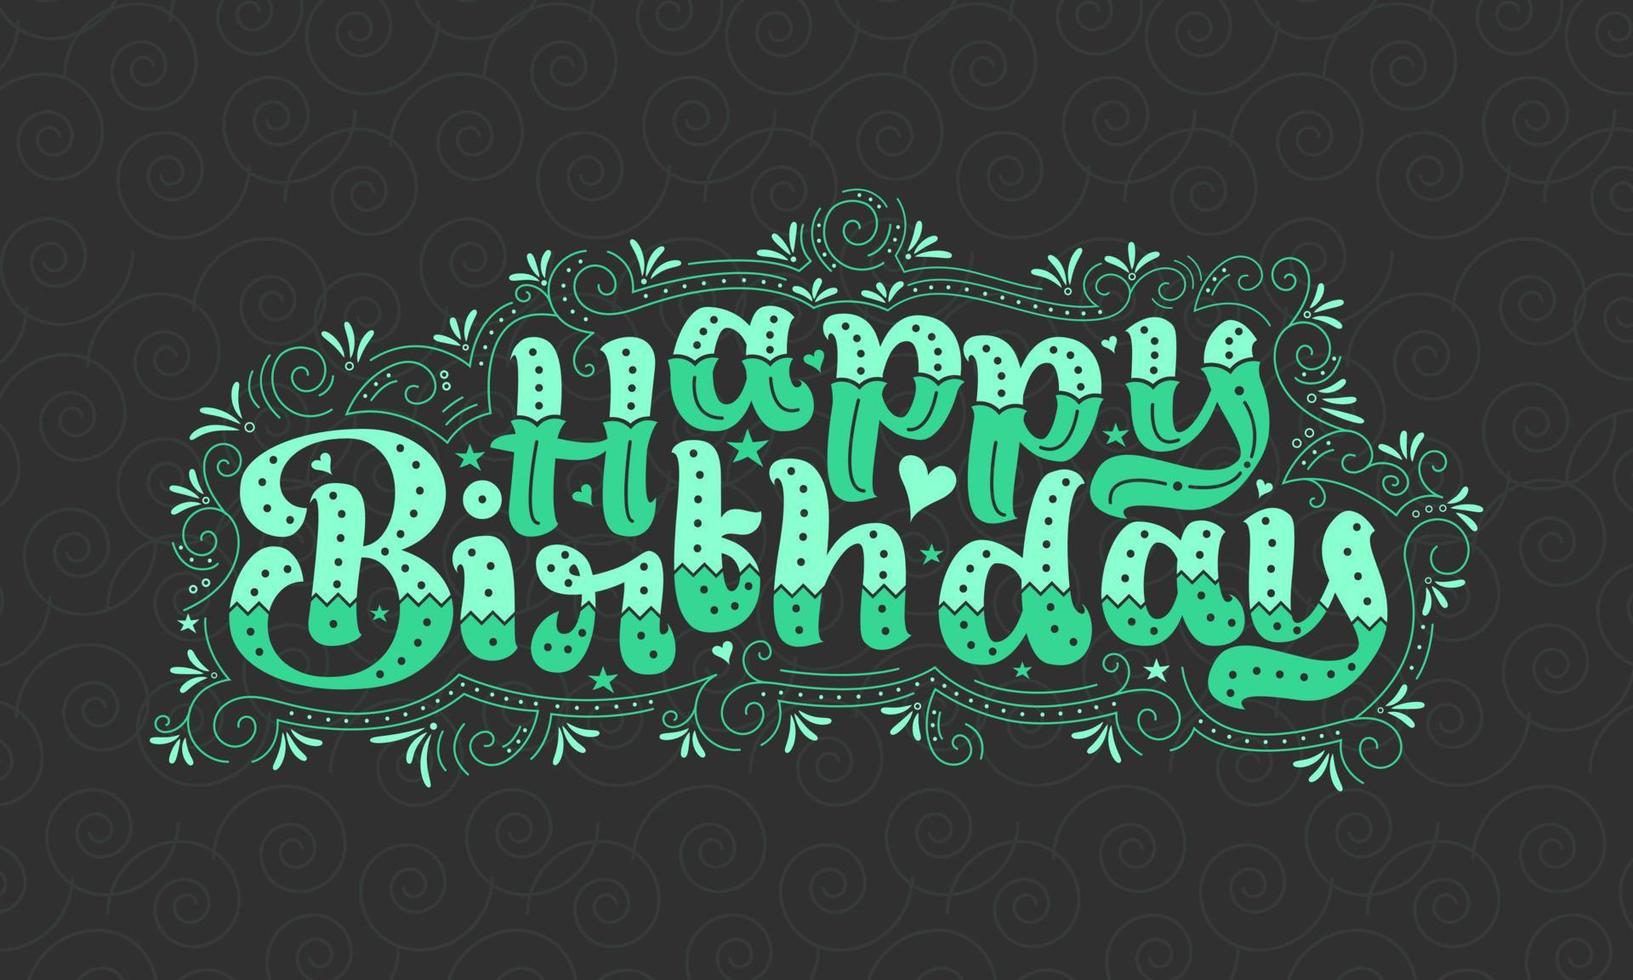 Happy Birthday beautiful lettering design with dots, lines, and leaves. vector